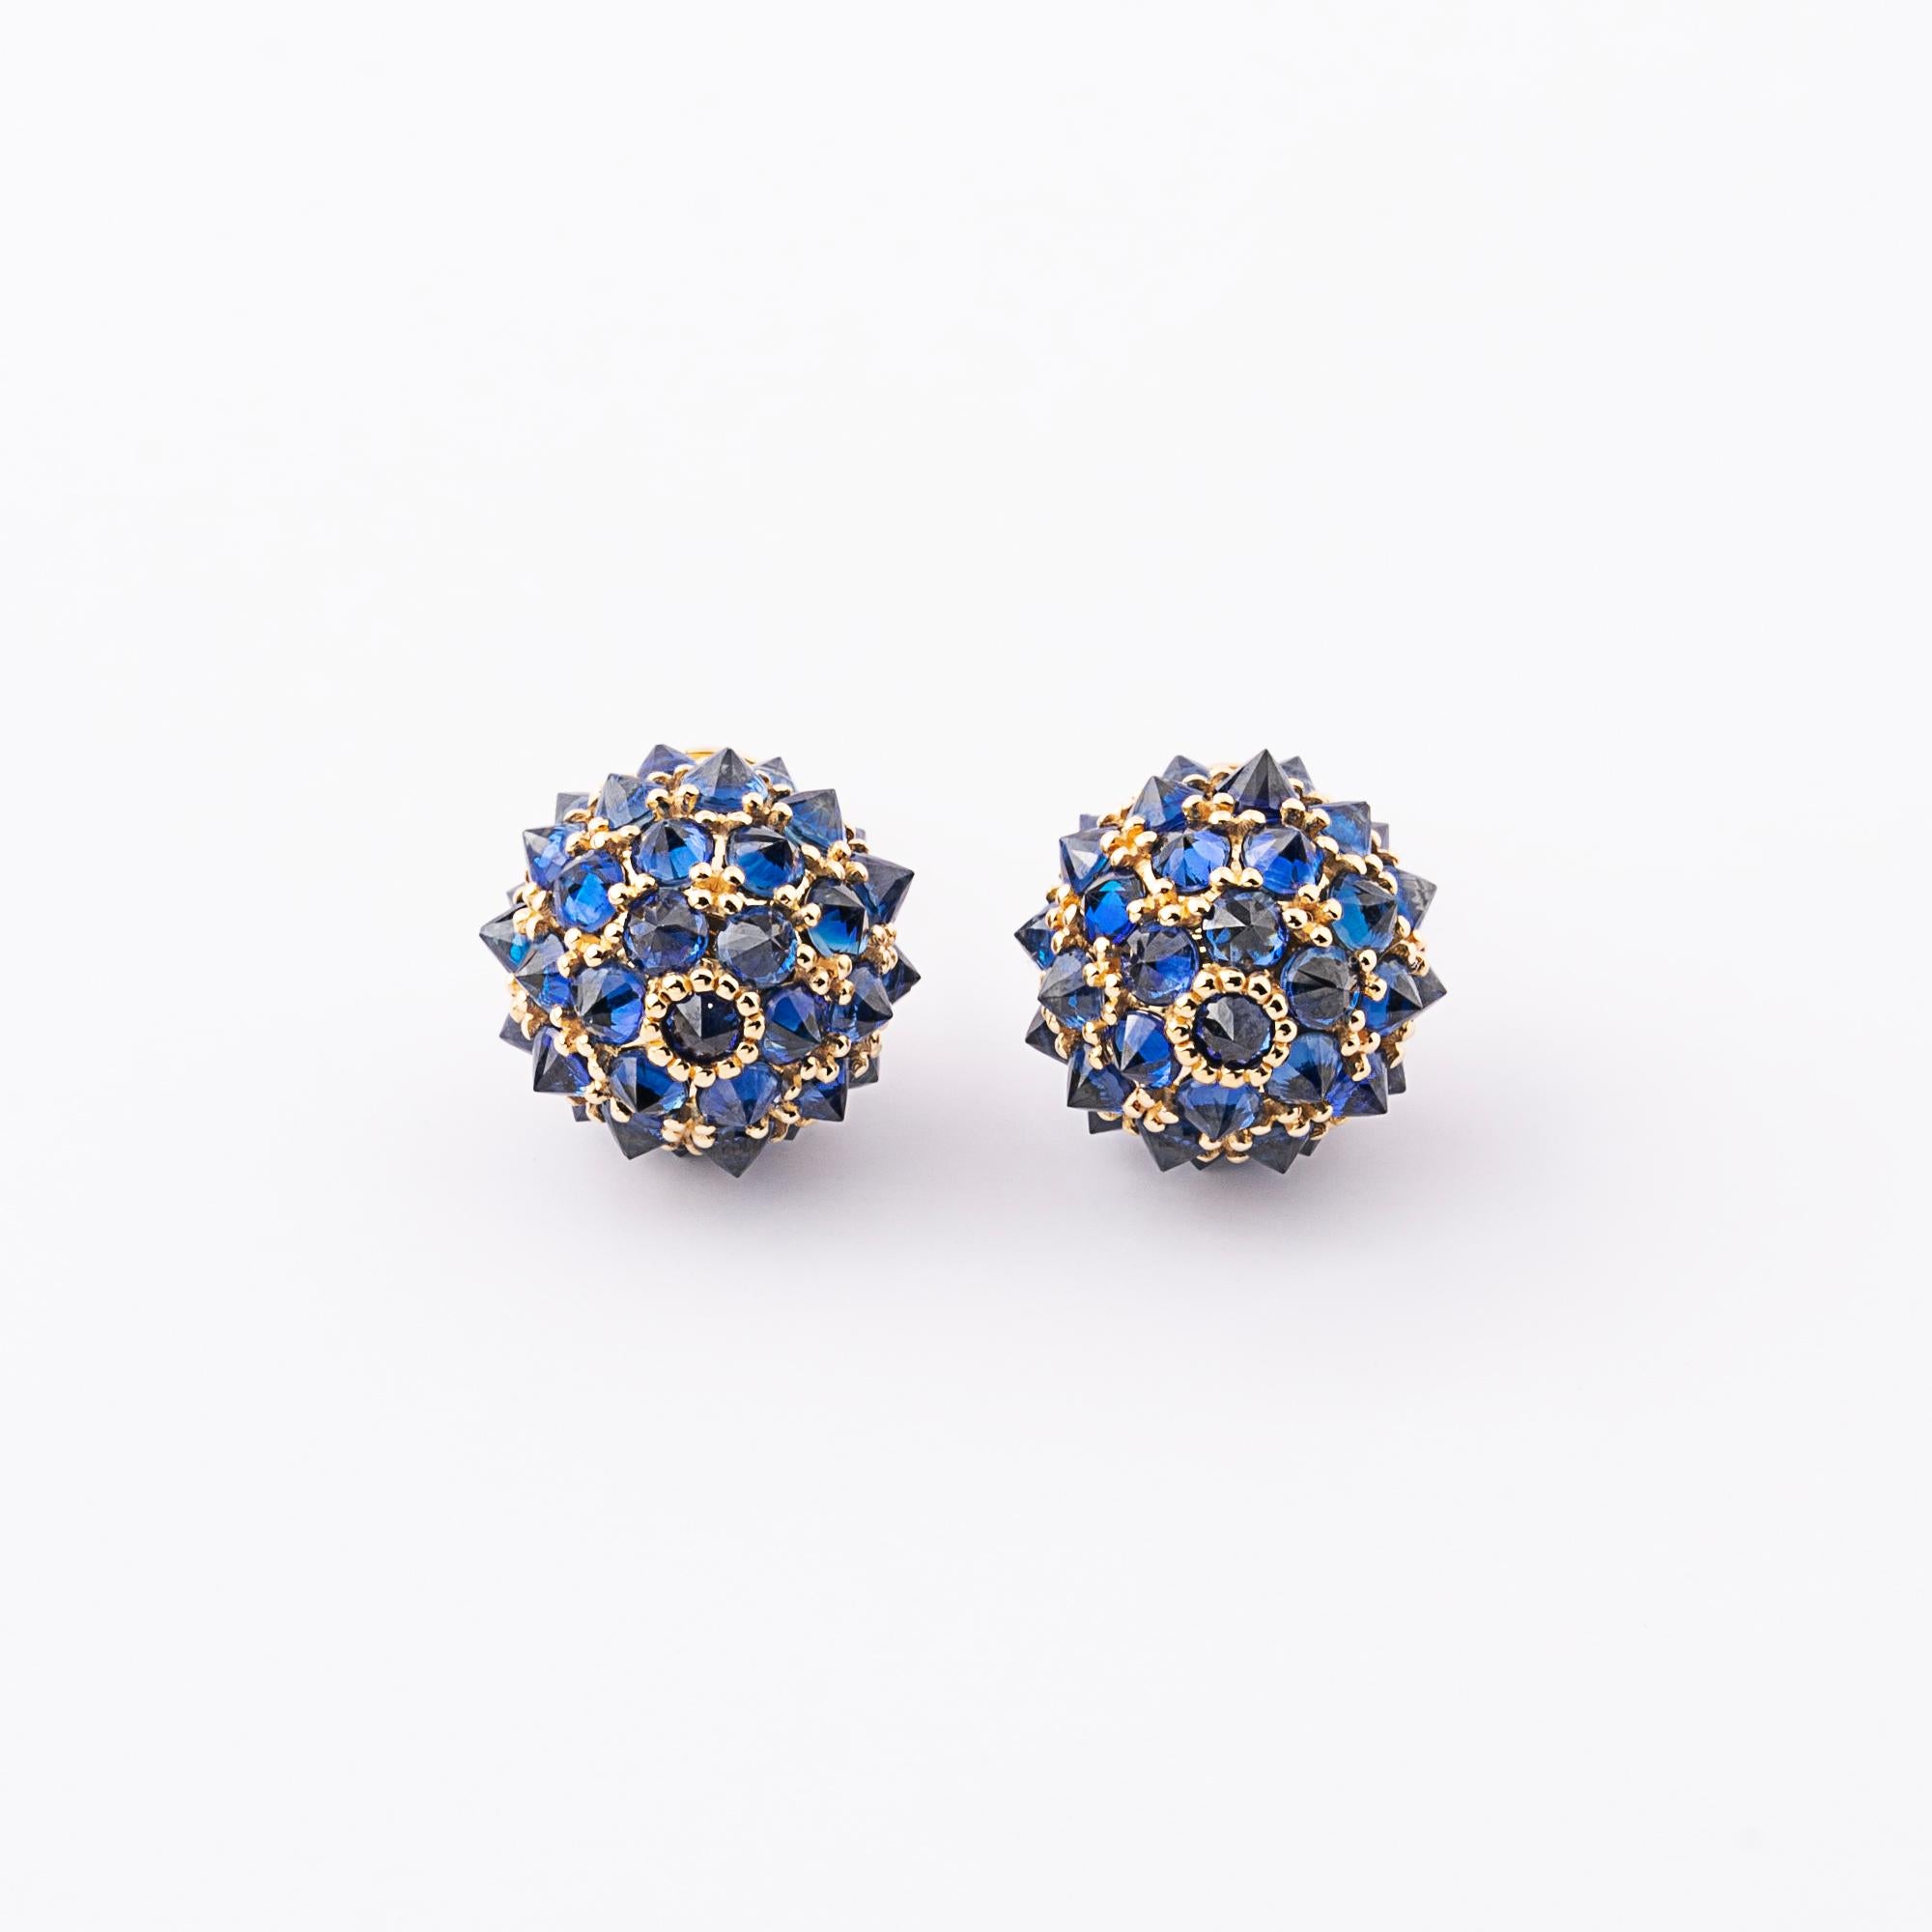 Sapphire gemstone earrings in 18k gold.  Extraordinary design with attention to detail. Exclusively available at our store only.  
Diameter size: 1.4cm diameter 
Specially cut 2.7mm diameter brilliant natural blue sapphires from Africa. Stone